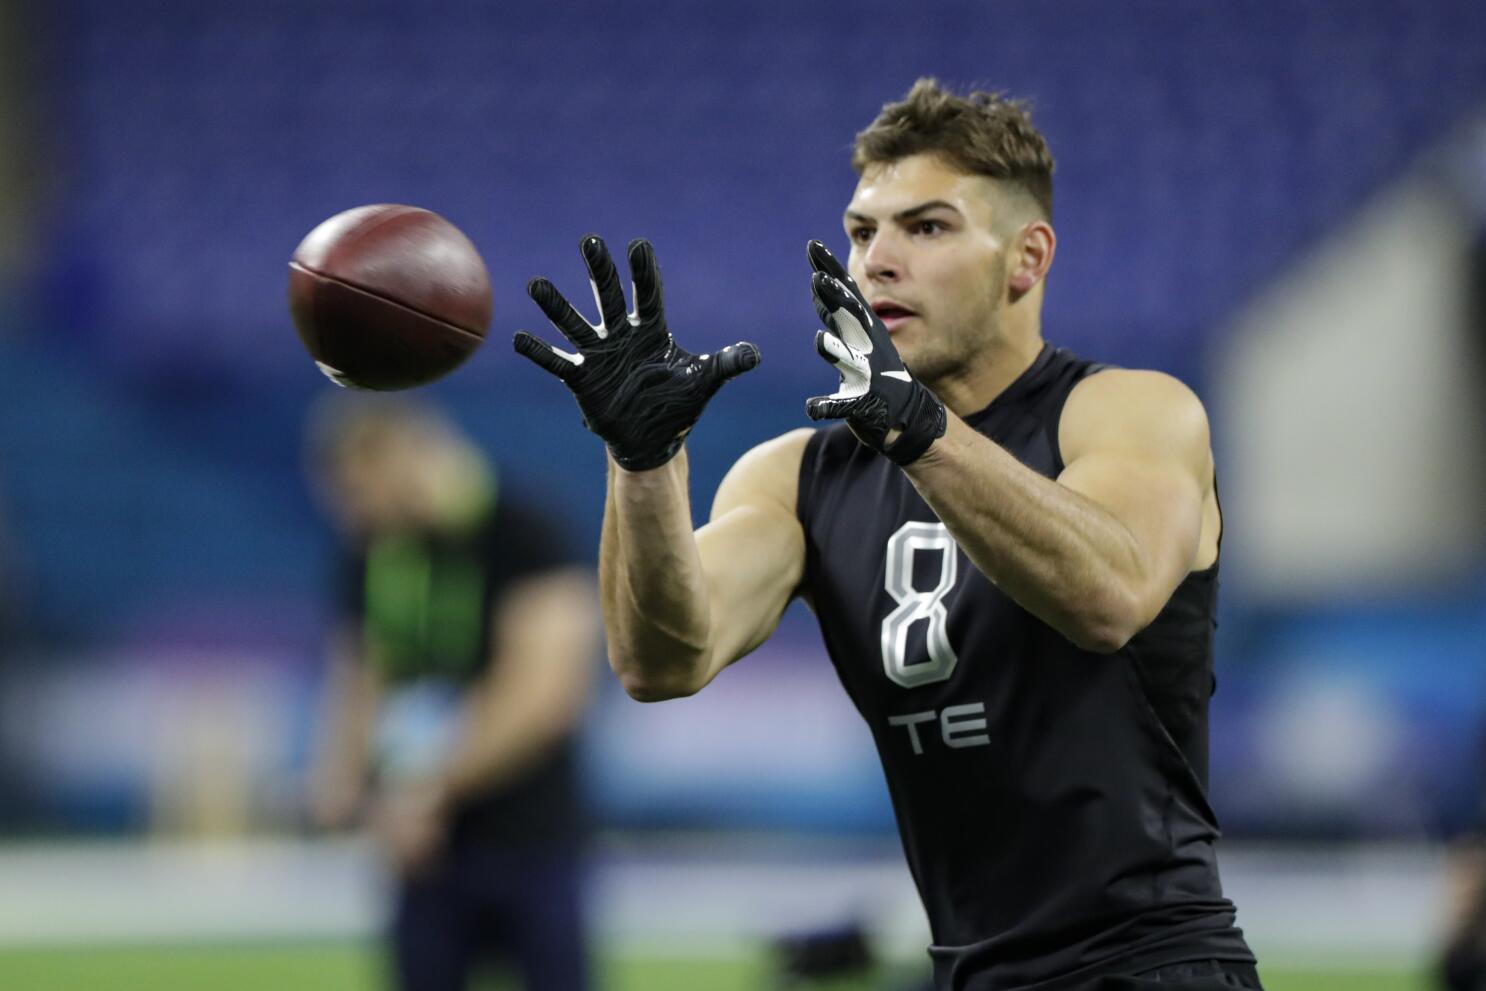 2020 NFL Draft: Top Tight Ends - The San Diego Union-Tribune